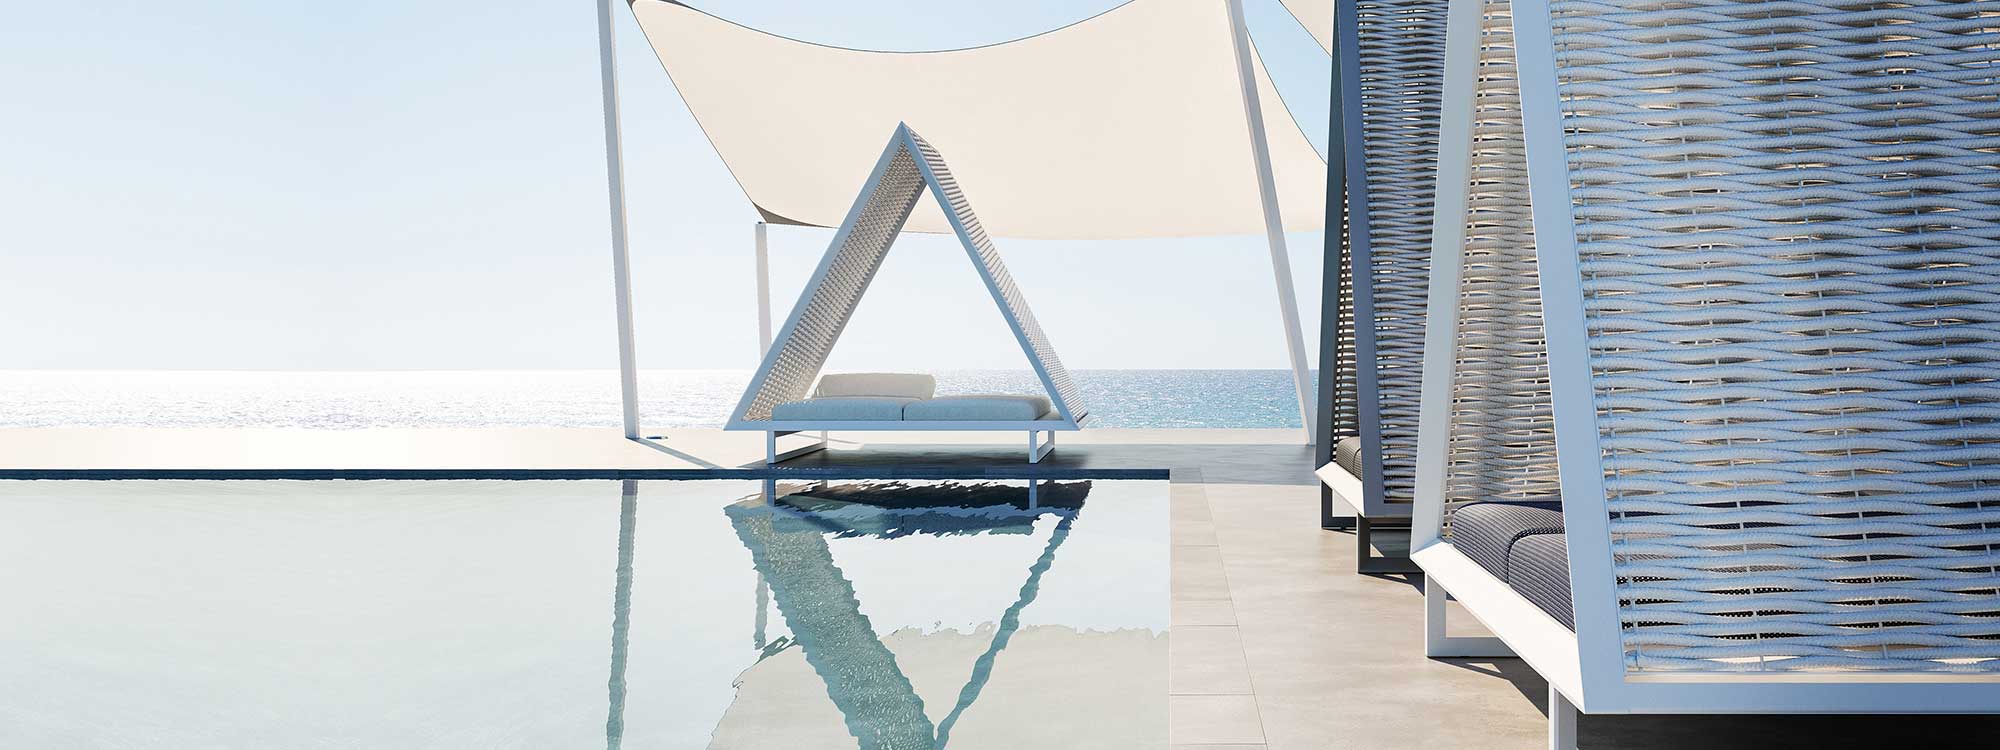 Image of Vondom Vineyard triangular outdoor daybeds around horizon pool beneath billowing canopies, with blue sea and sky in the background